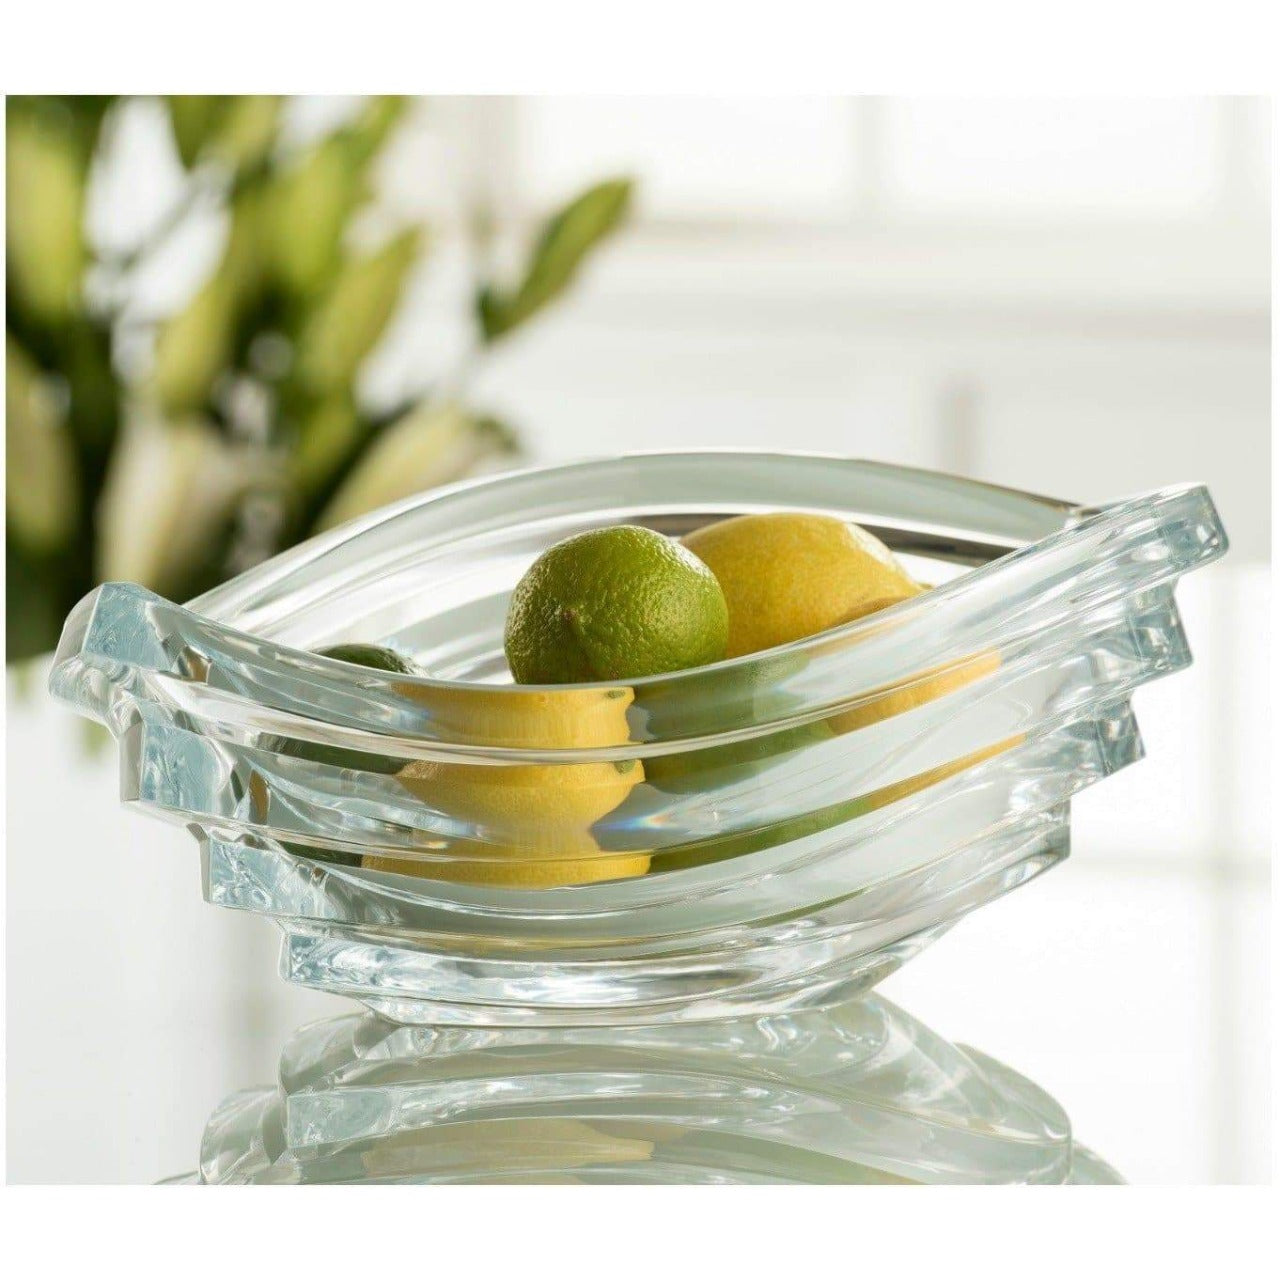 Galway Crystal Atlantic Large Bowl  The Atlantic Range has a unique and beautiful design that represents the sharp waves found in the Atlantic Ocean. It captures light and reflections no matter where it is placed. It makes the perfect Homeware Gift either for someone special or for yourself! It can be used a centerpiece or as a fruit bowl.